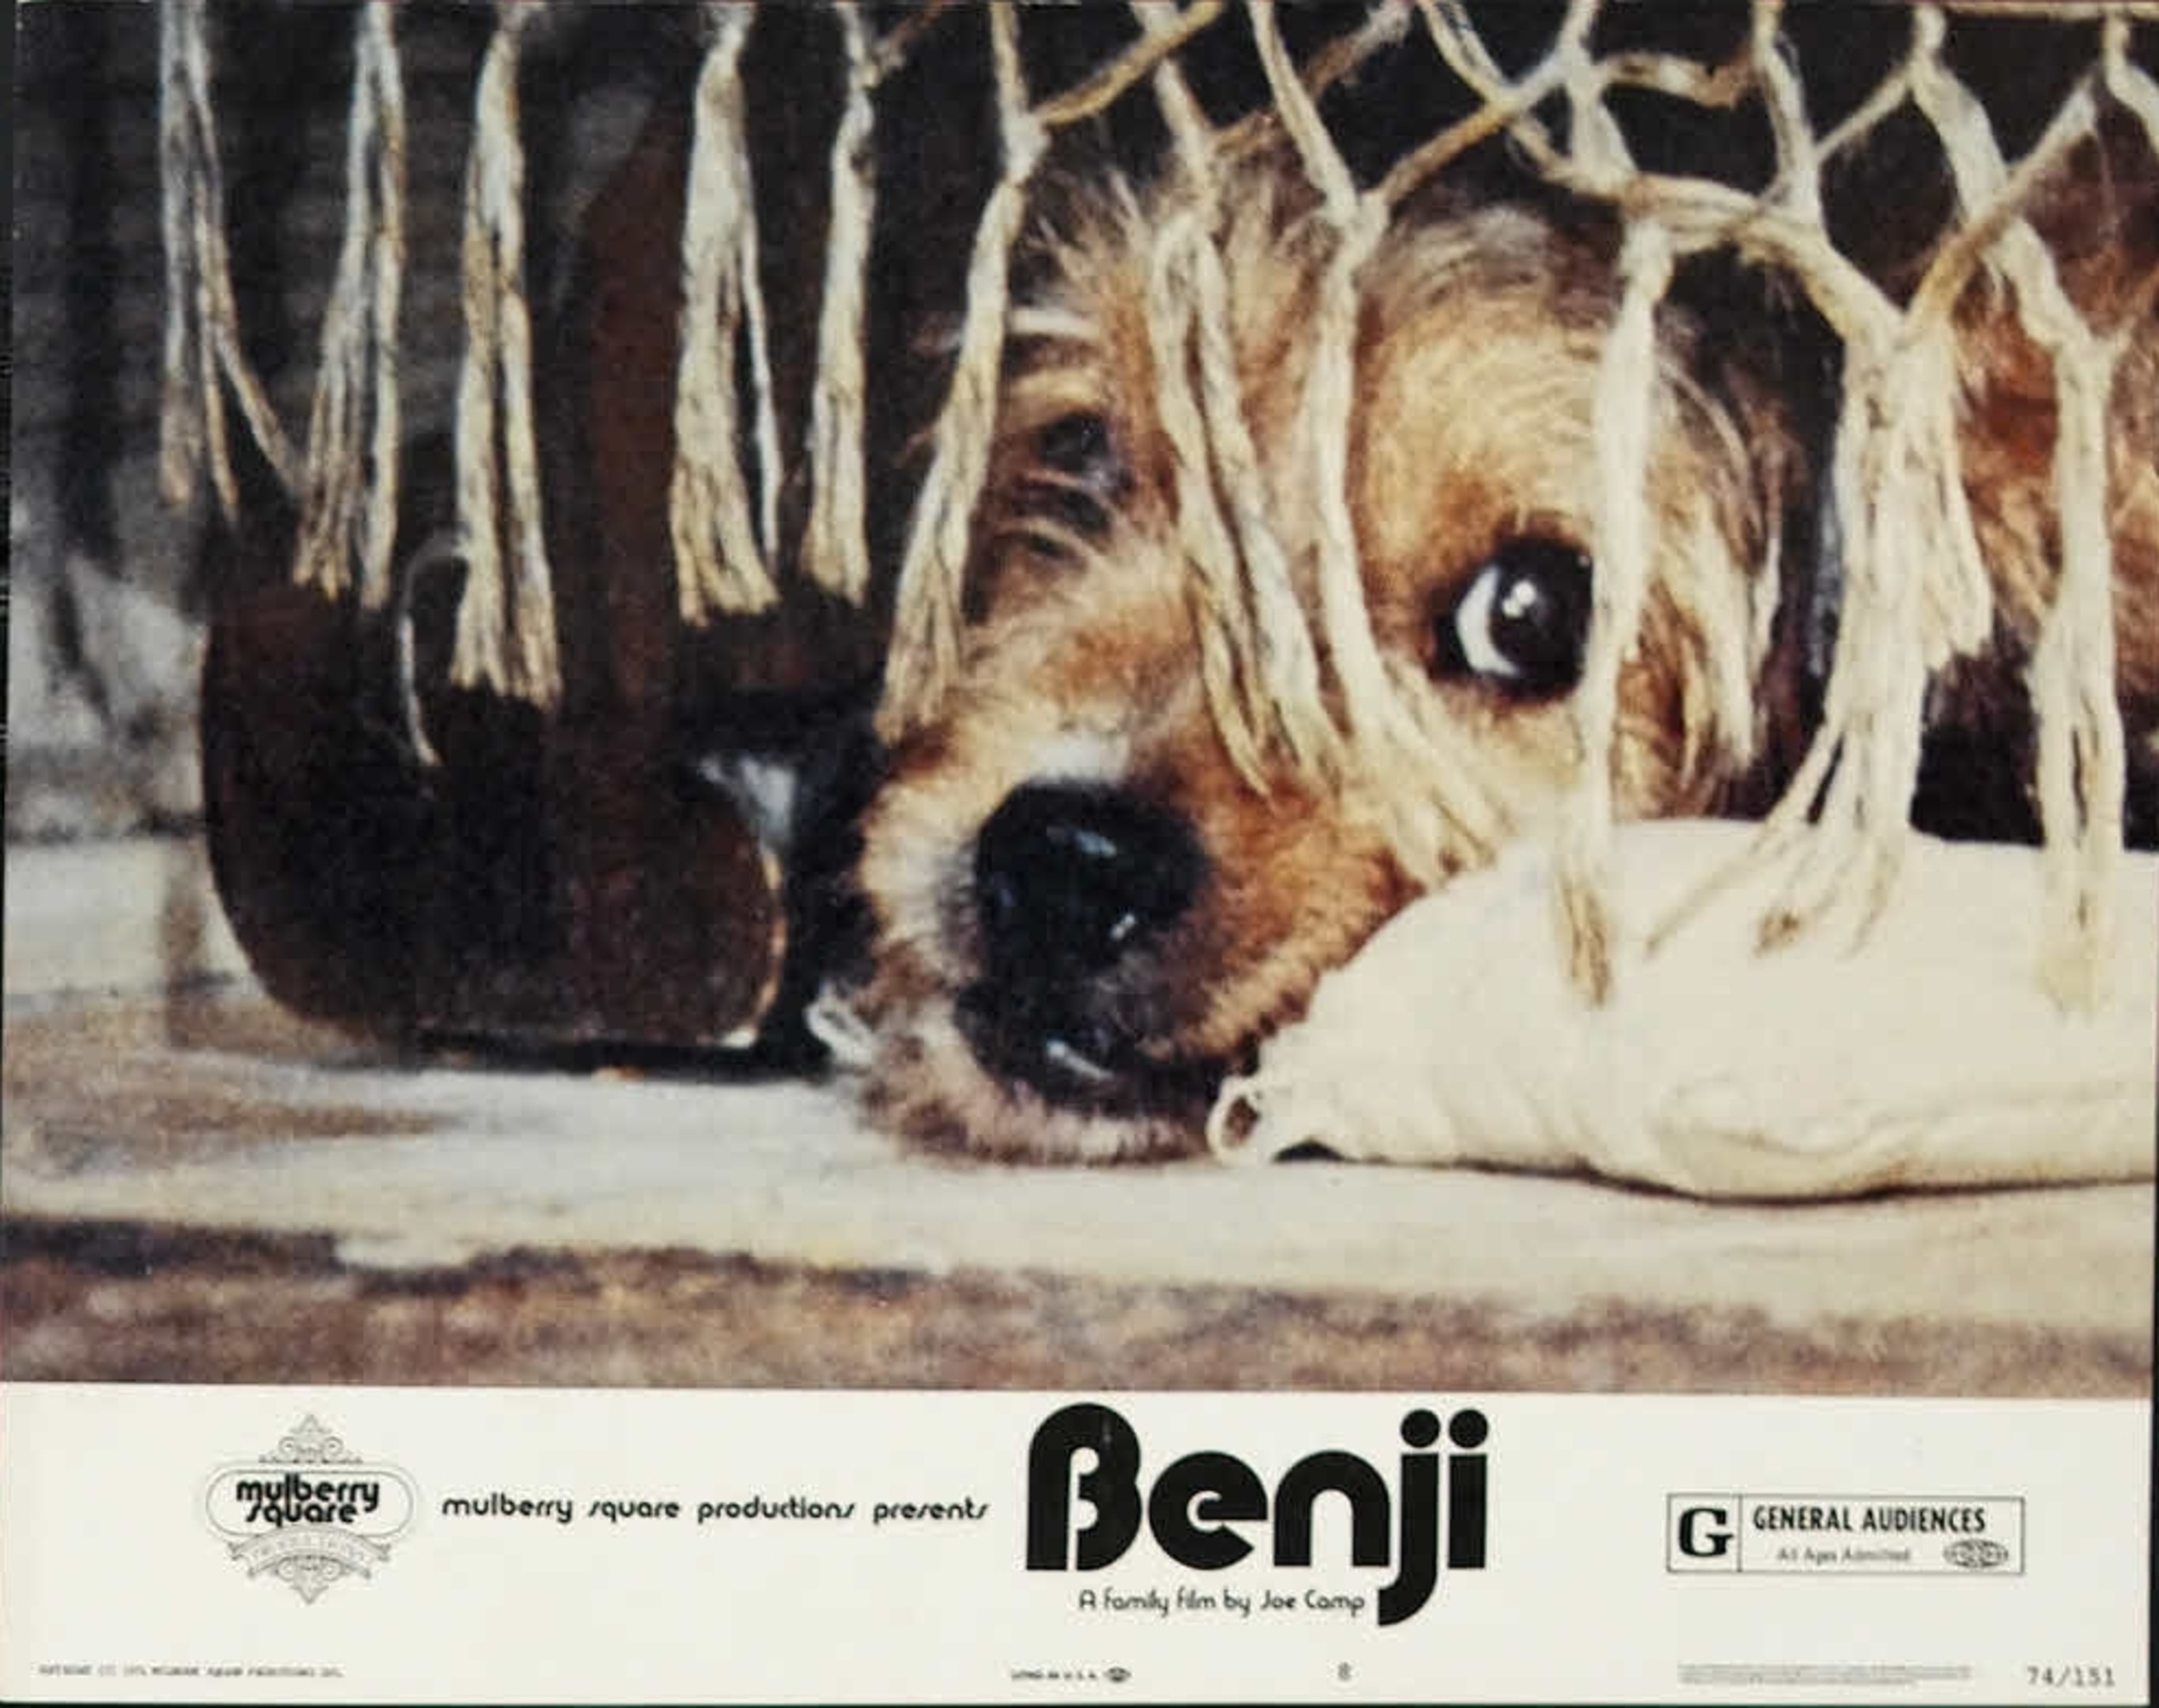 <p>“Benji” is a true American success story. Director Joe Camp couldn’t get any studio to make his movie about a mutt on an adventure. He made it for $500,000. It made $45 million, and then spawned four sequels, including the ominously named “Benji the Hunted.”</p><p><a href='https://www.msn.com/en-us/community/channel/vid-cj9pqbr0vn9in2b6ddcd8sfgpfq6x6utp44fssrv6mc2gtybw0us'>Follow us on MSN to see more of our exclusive entertainment content.</a></p>